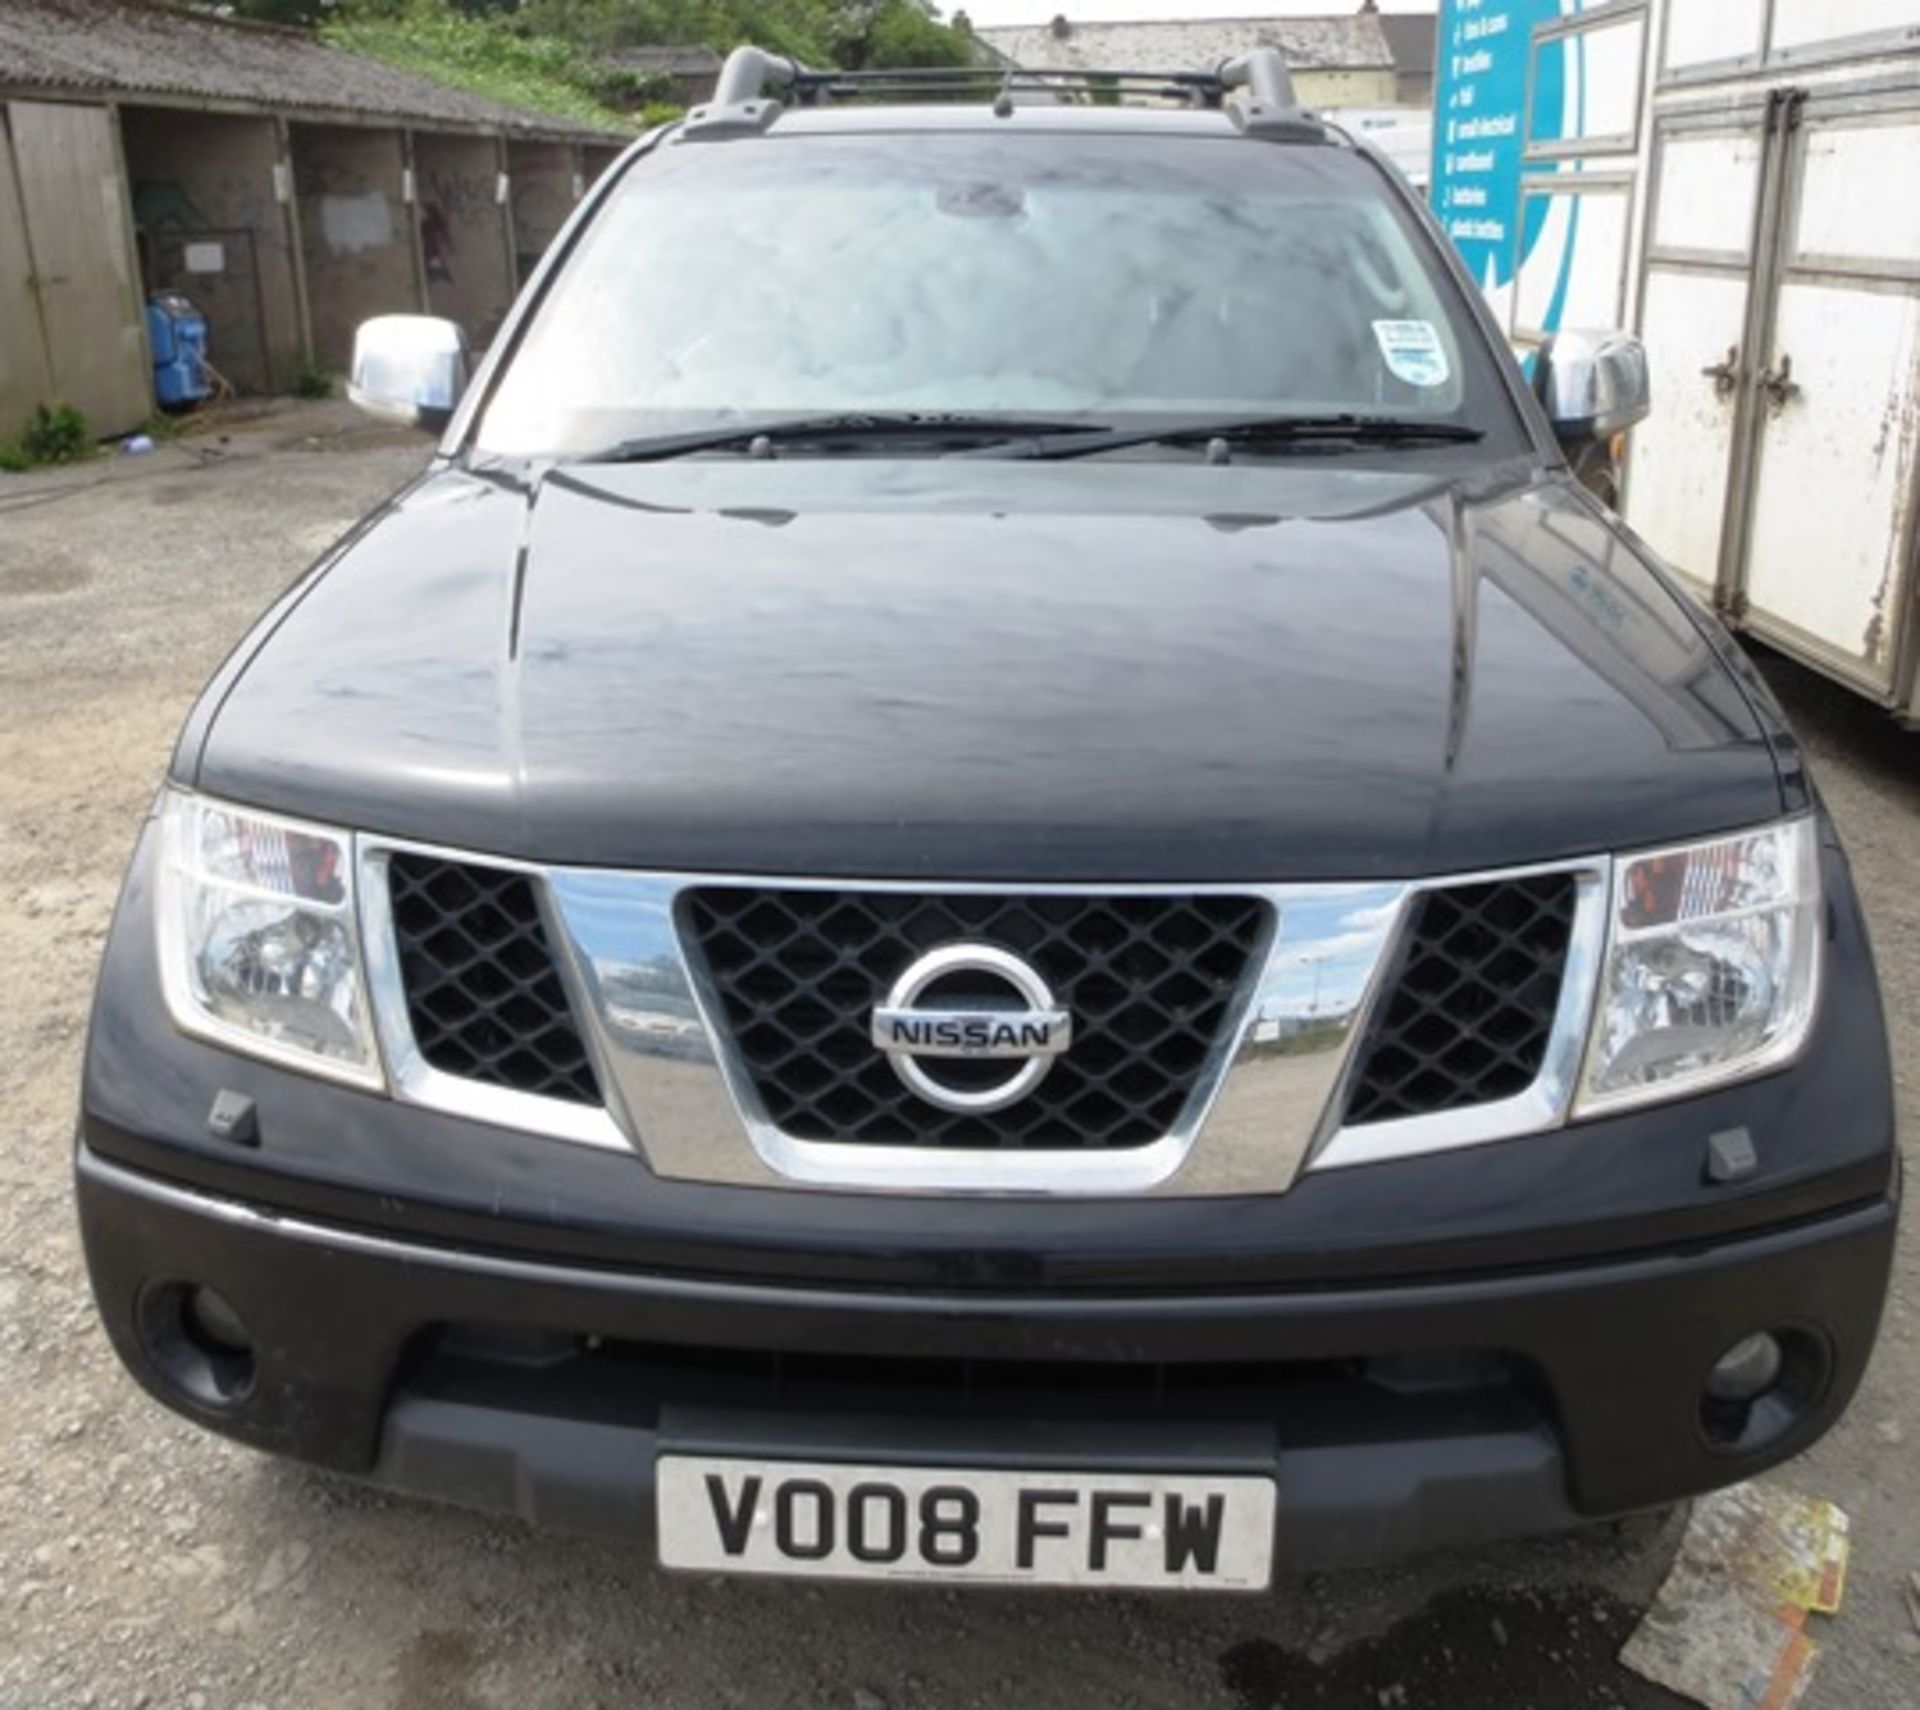 Nissan Navara Expedition LWB double cab DCI pick truck with canopy, leather interior, satnav, - Image 9 of 12